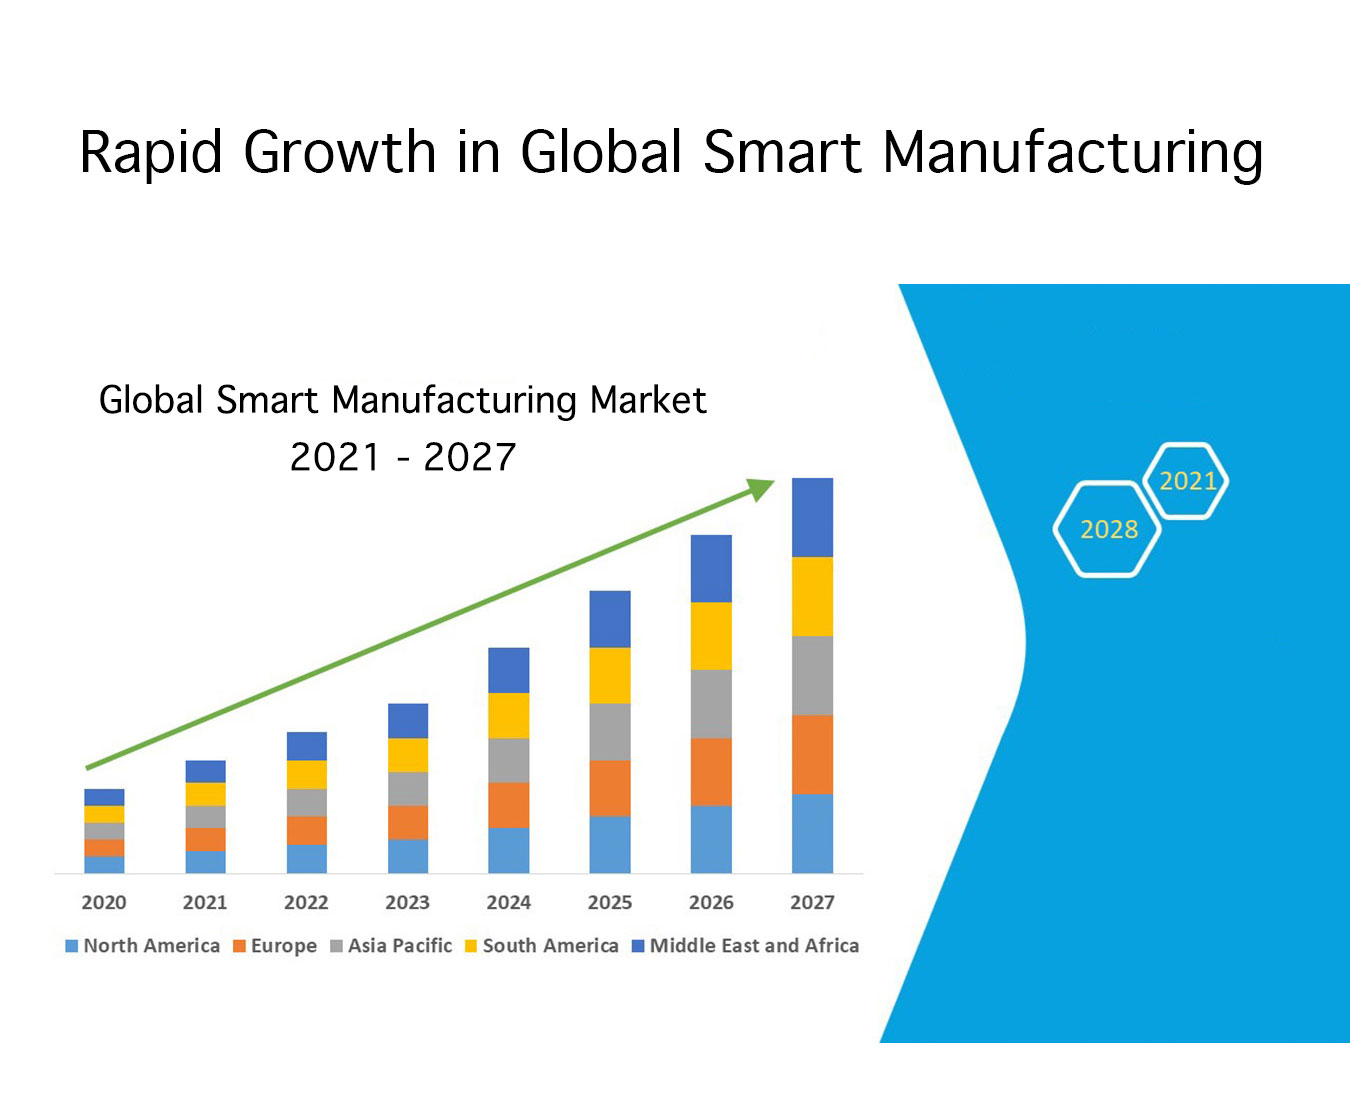 improve supply chain communication is one of the benefits of the growing trend in smart manufacturing. this image shows rapid growth from 2021 to 2027 in the global smart manufacturing market